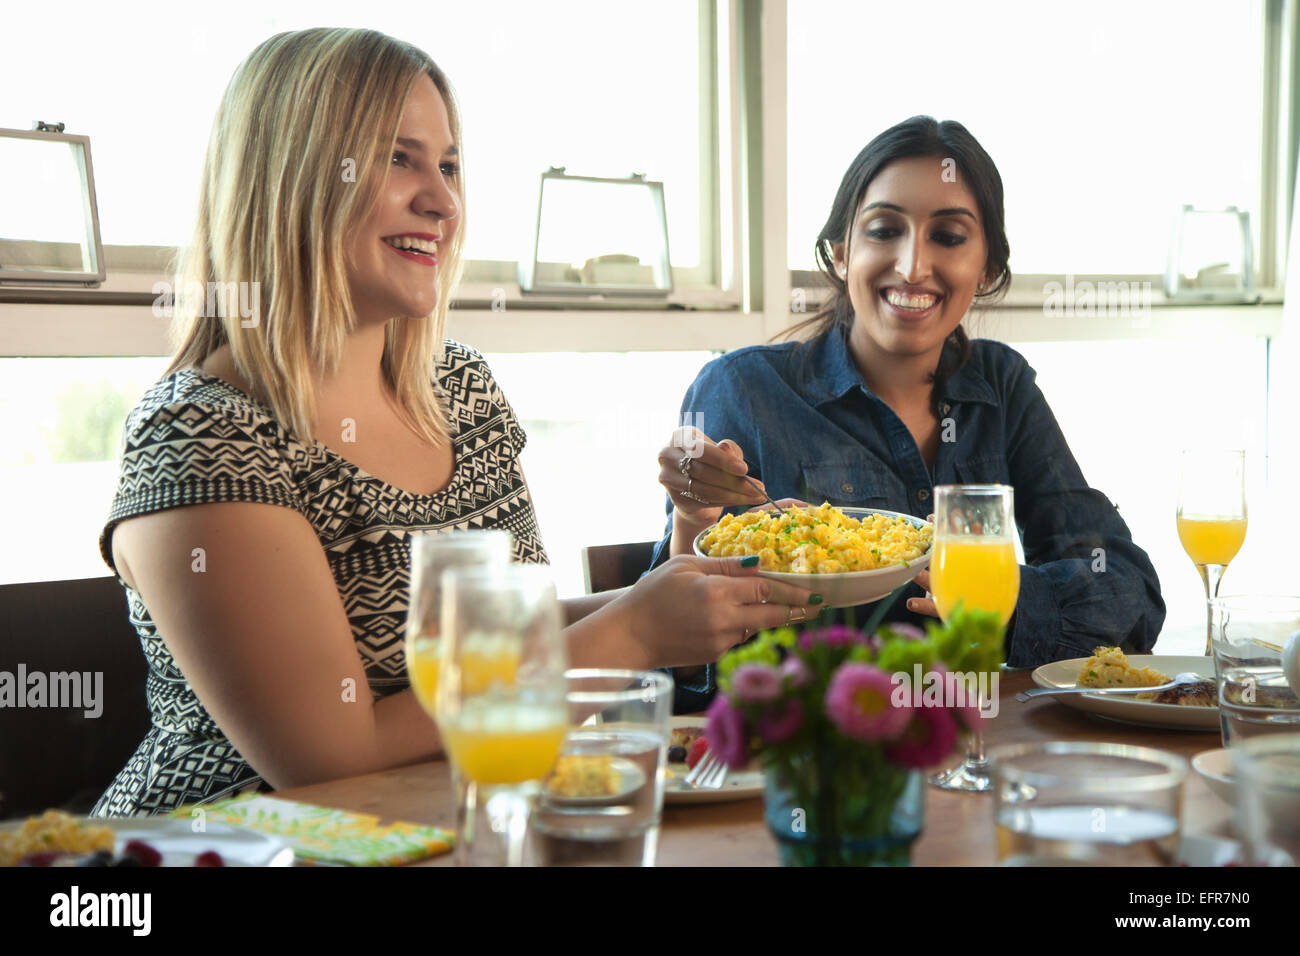 Group of friends having meal at table, young woman passing plate to friend Stock Photo